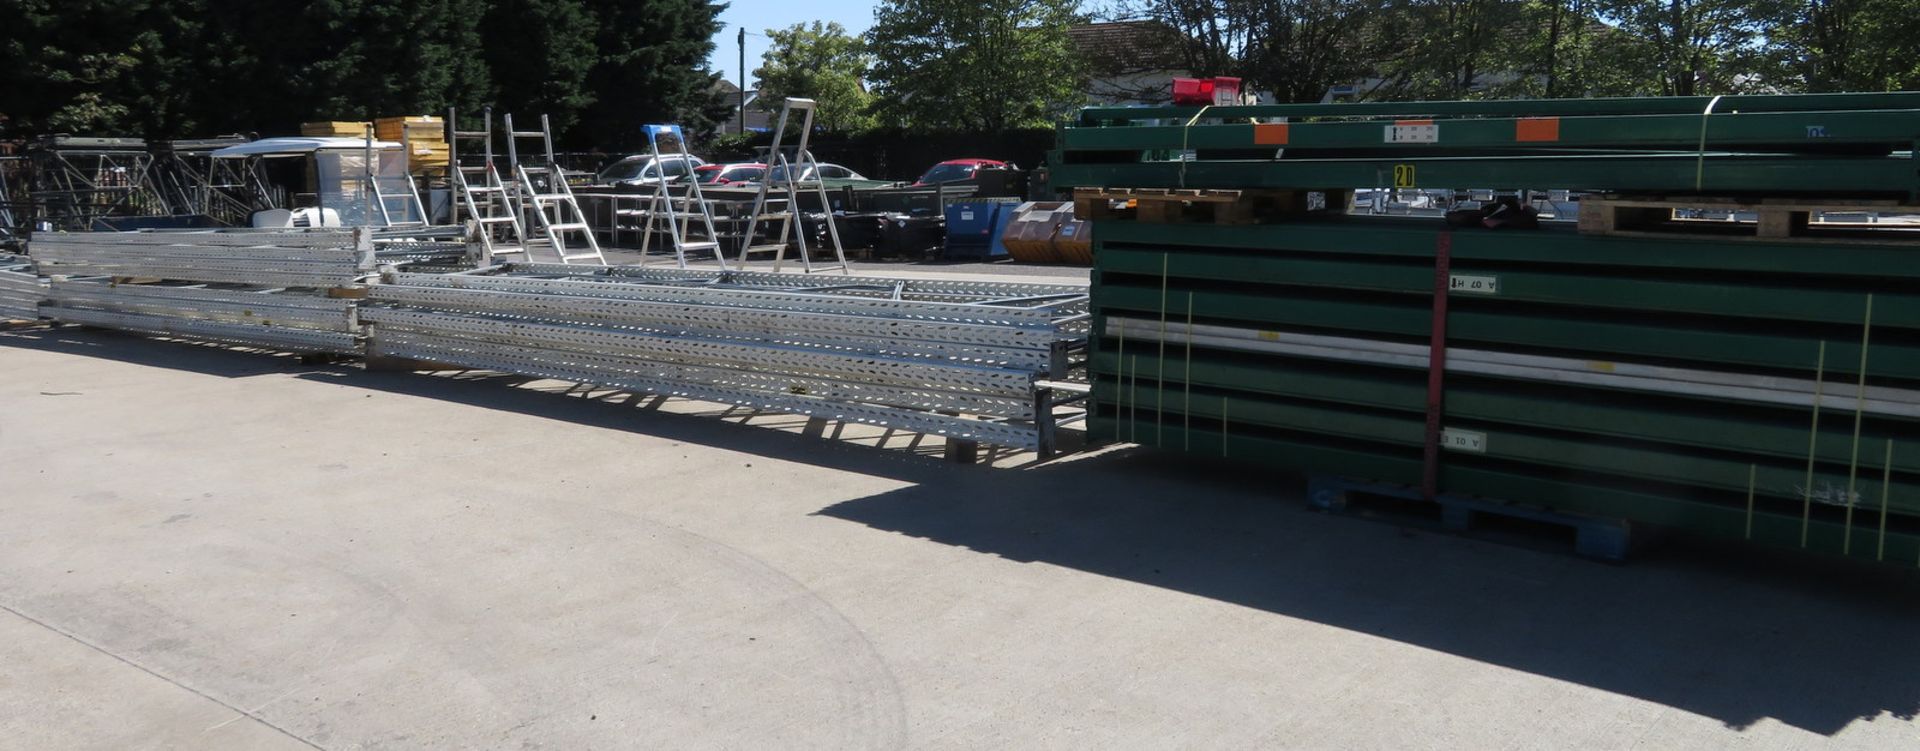 Racking assembly - 19x Uprights - 5700mm high x 1050mm wide, 140x Beams - 3300mm long